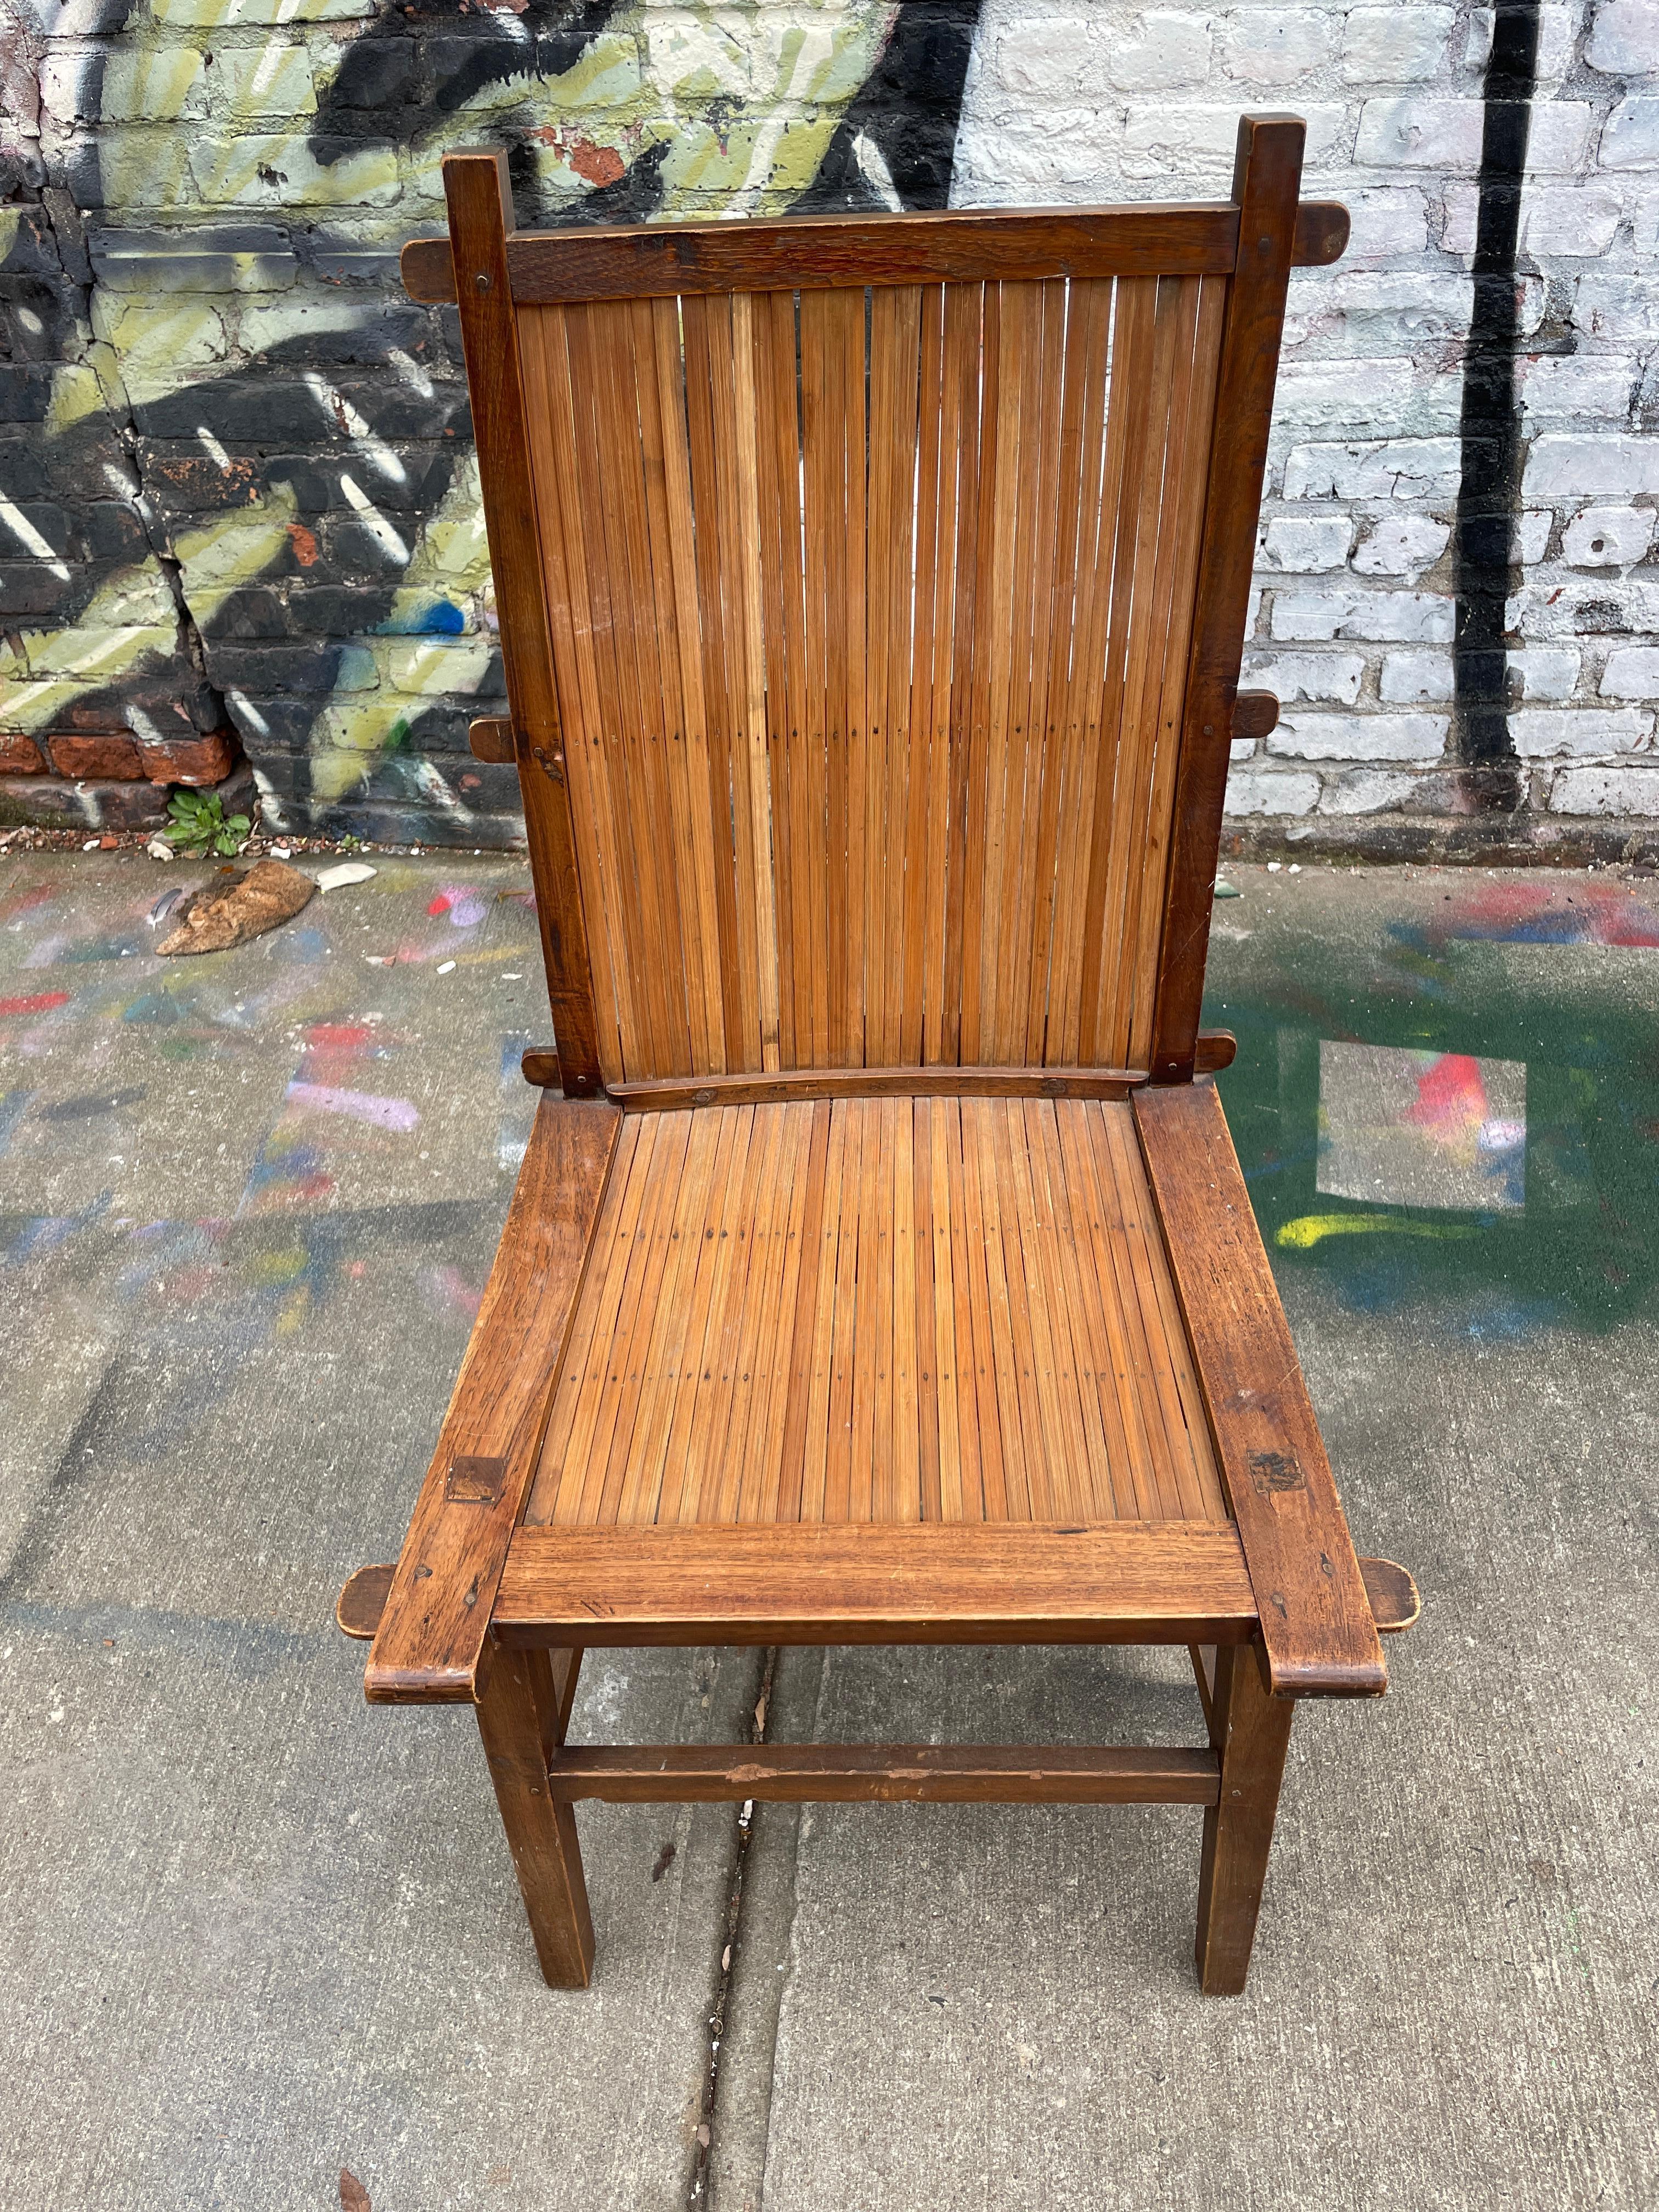 Mid century studio craft Japanese hand made chair slatted reed wood seat and seat back. Mostly all Japanese joints and nails. Magnificent patina. Very sturdy. Located in Brooklyn NYC.